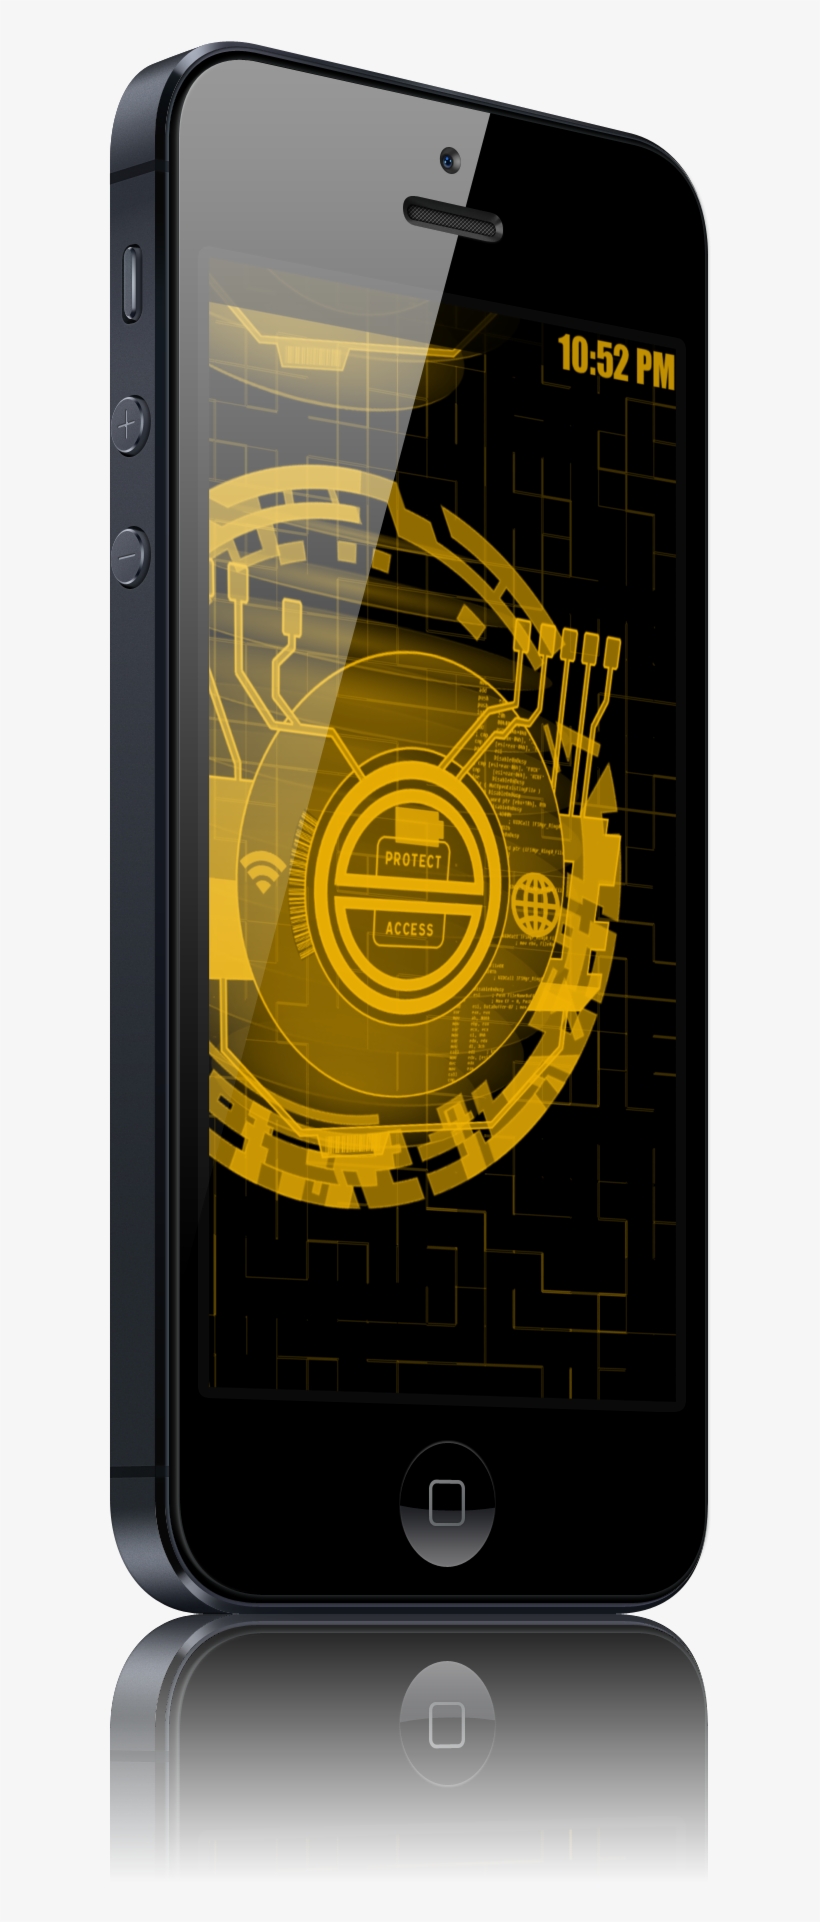 Ghost In The Shell - Apple Iphone 5 - Black & Slate, transparent png #1536193